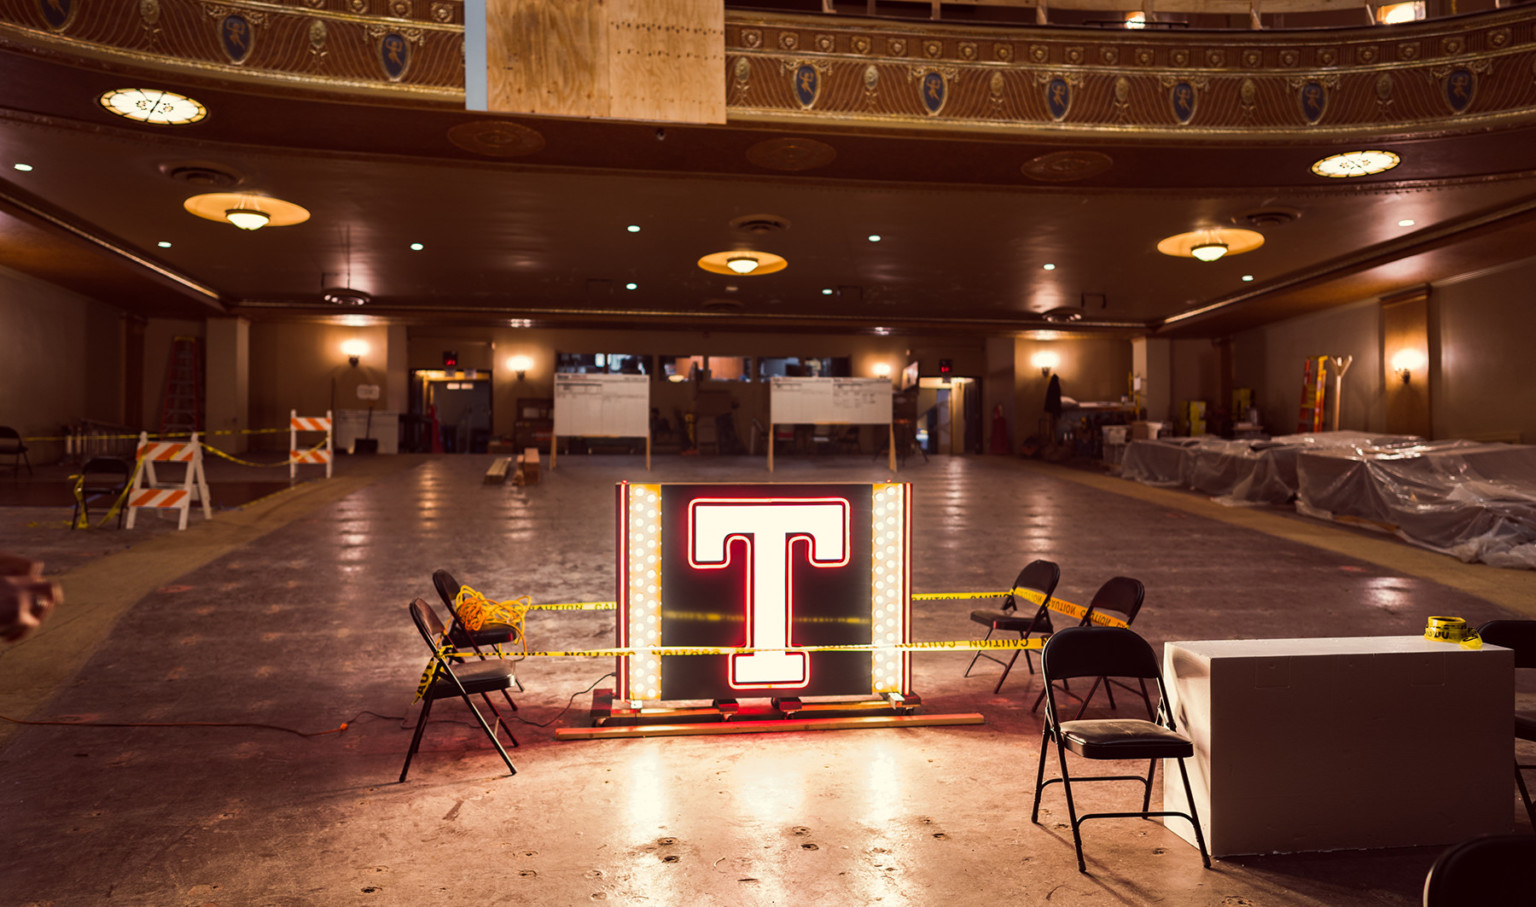 Illuminated letter T in box with lights on sides inside of partially constructed theater with no seats, molding on balcony